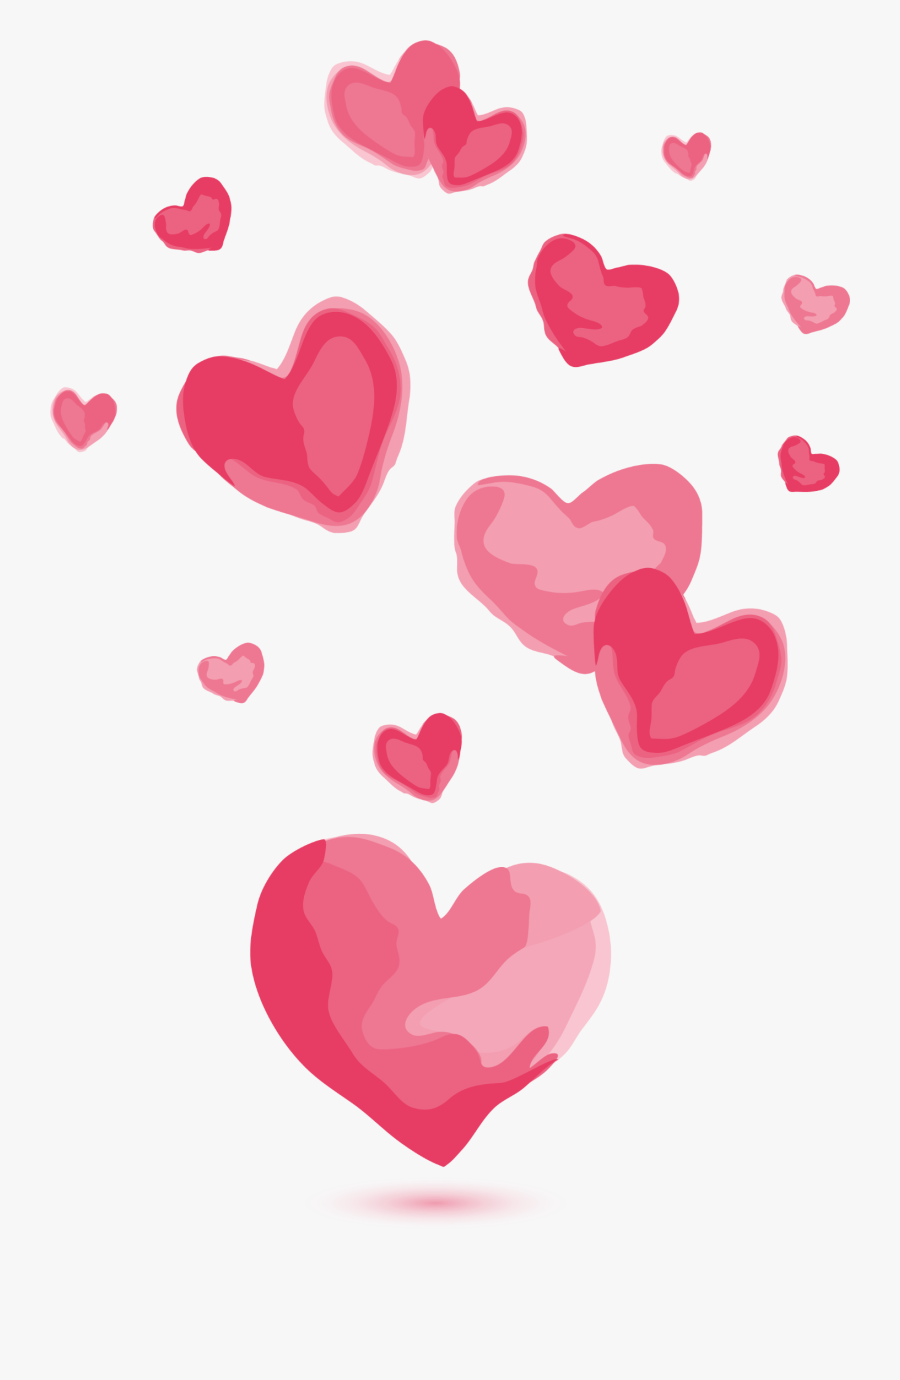 Love Material Transprent Png Free Download Heart - Vector Love Icon Png, Transparent Clipart